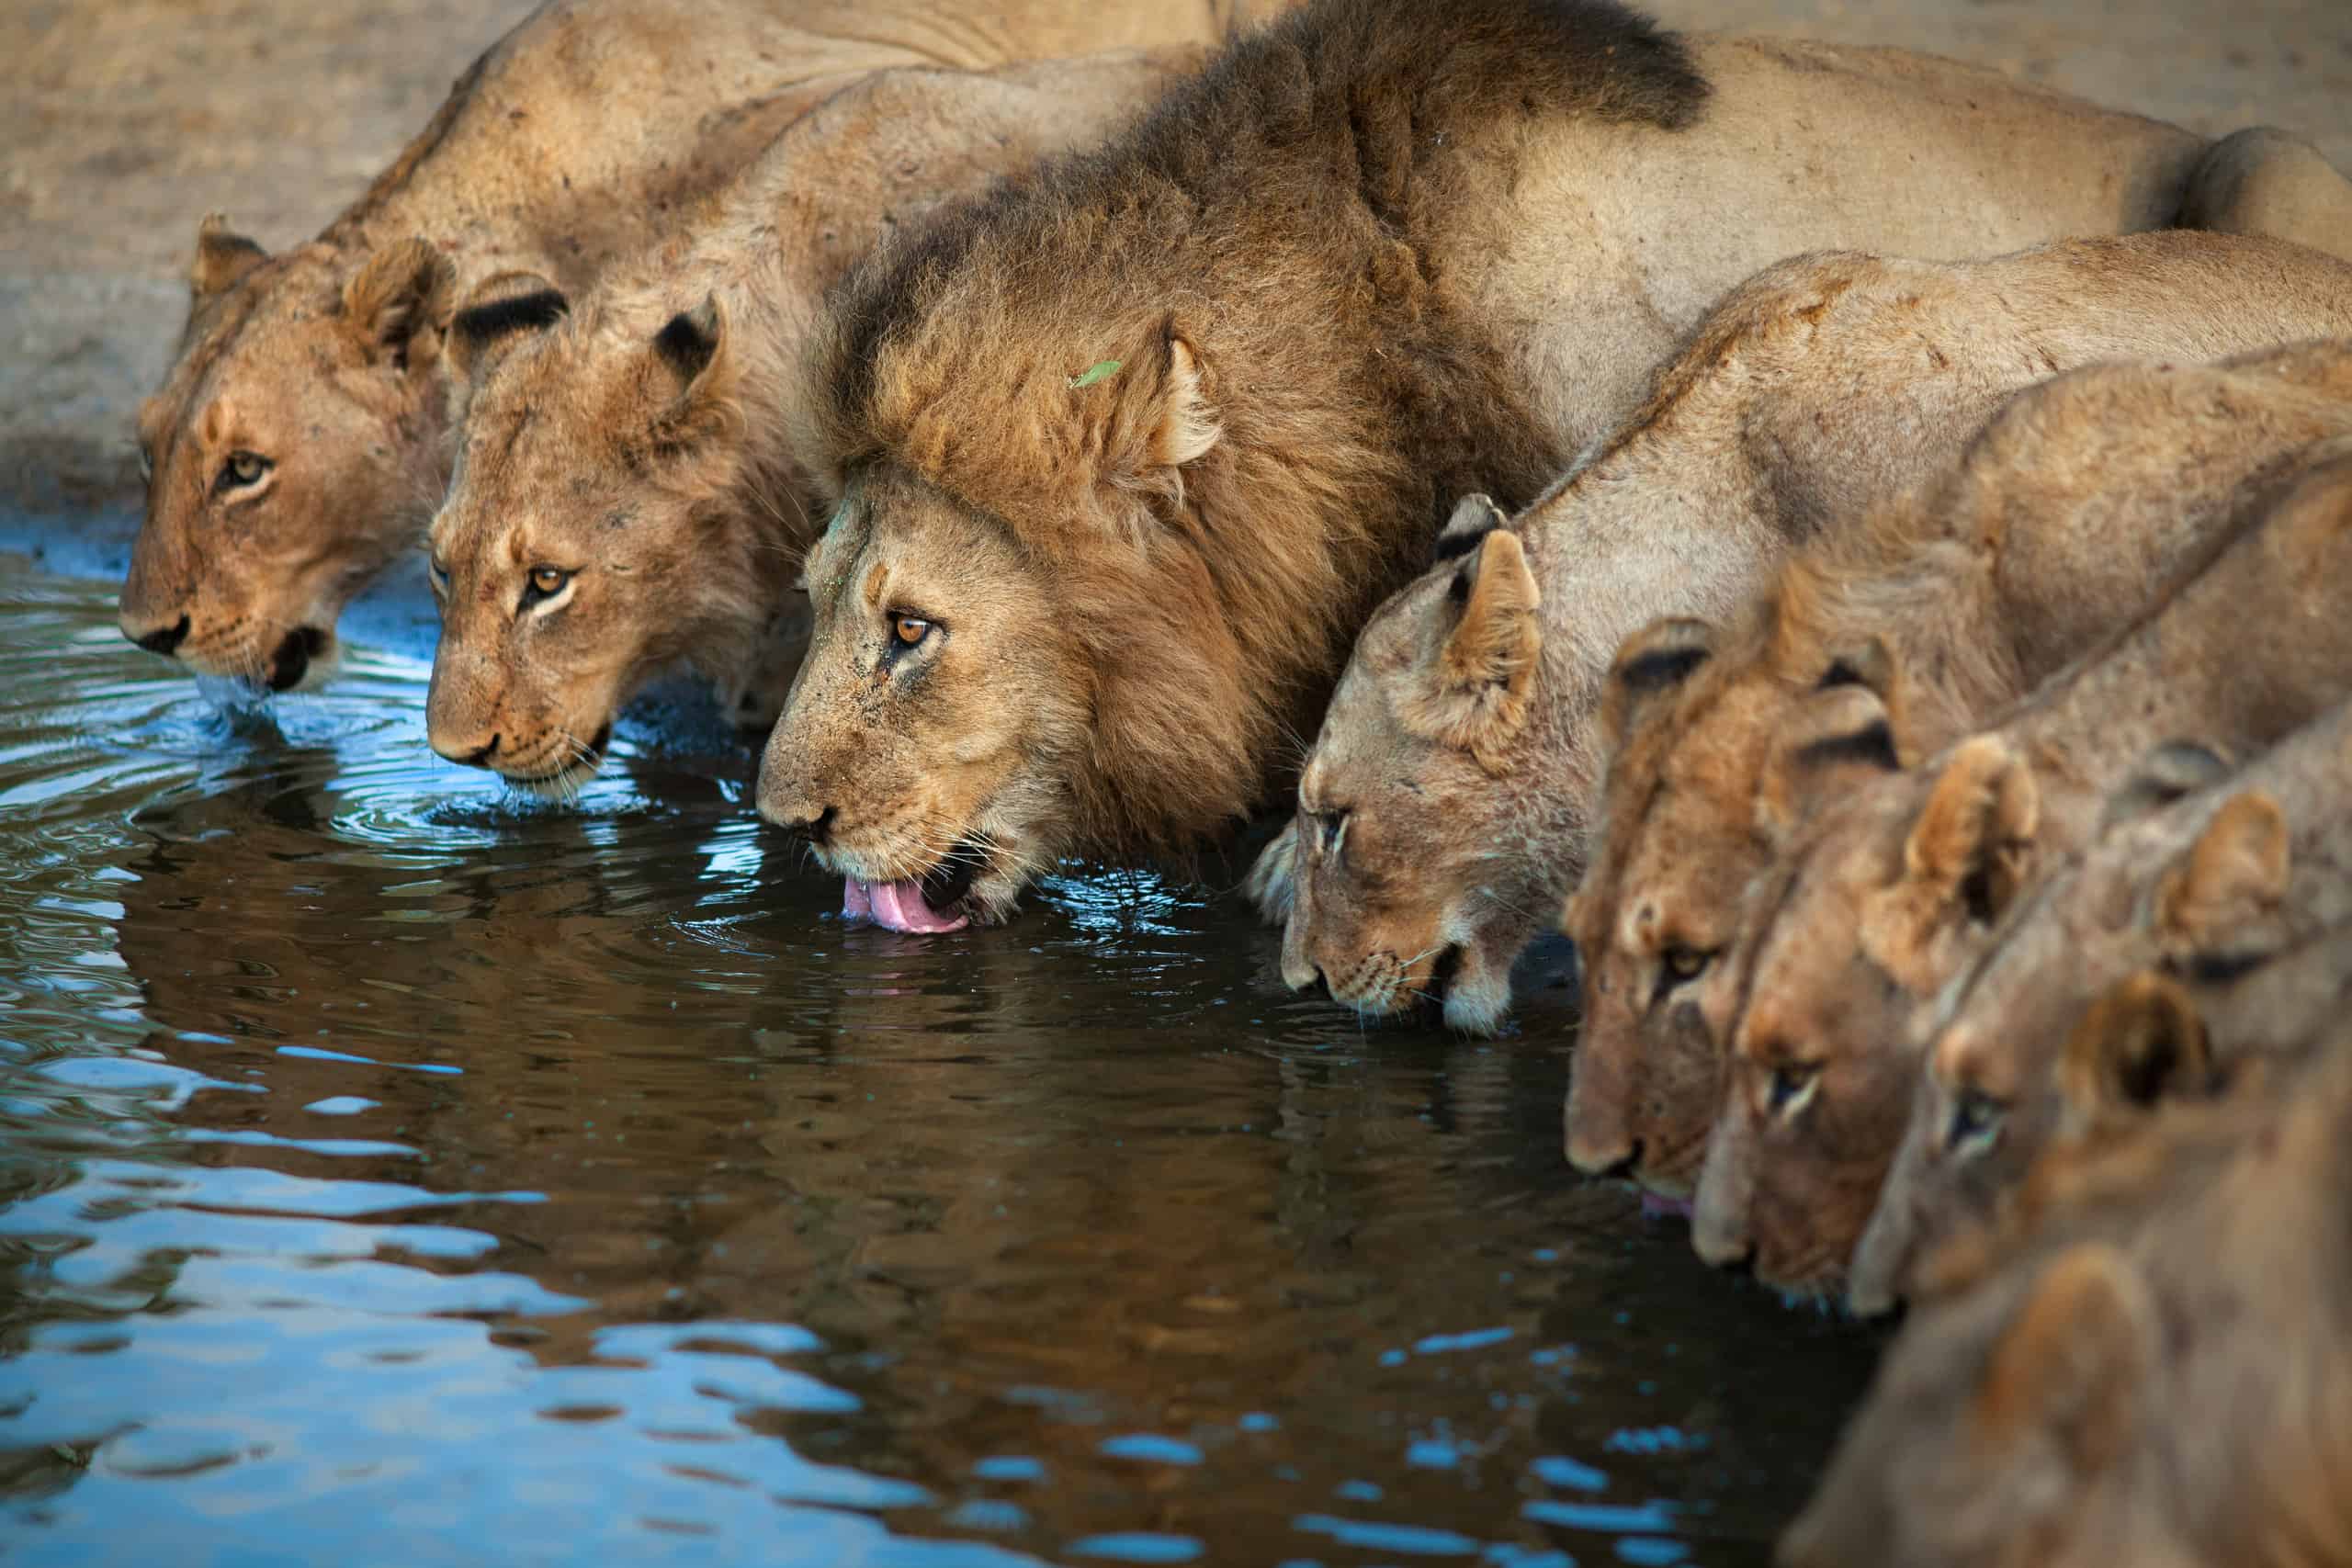 A pride of lions drinking from a pond.